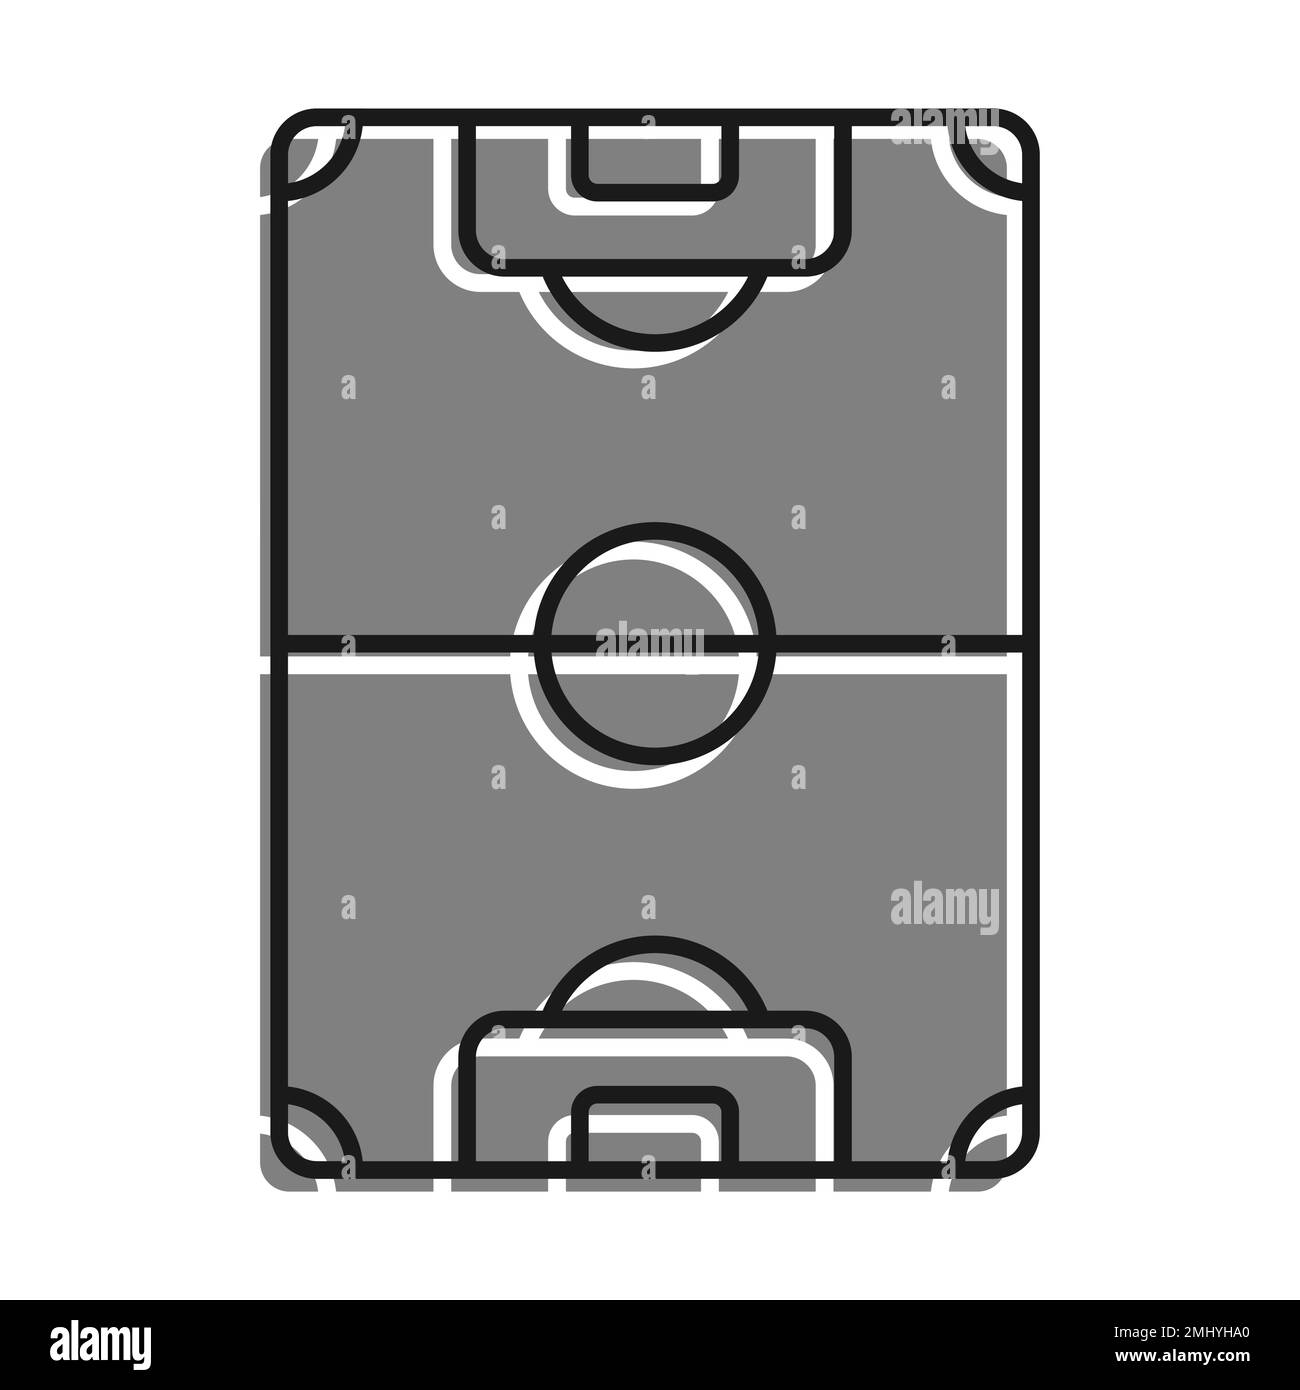 Linear filled with gray color icon. Soccer Field Markings Lines. Outline Football Playground Top View. Sports Ground For Active Recreation. Simple bla Stock Vector